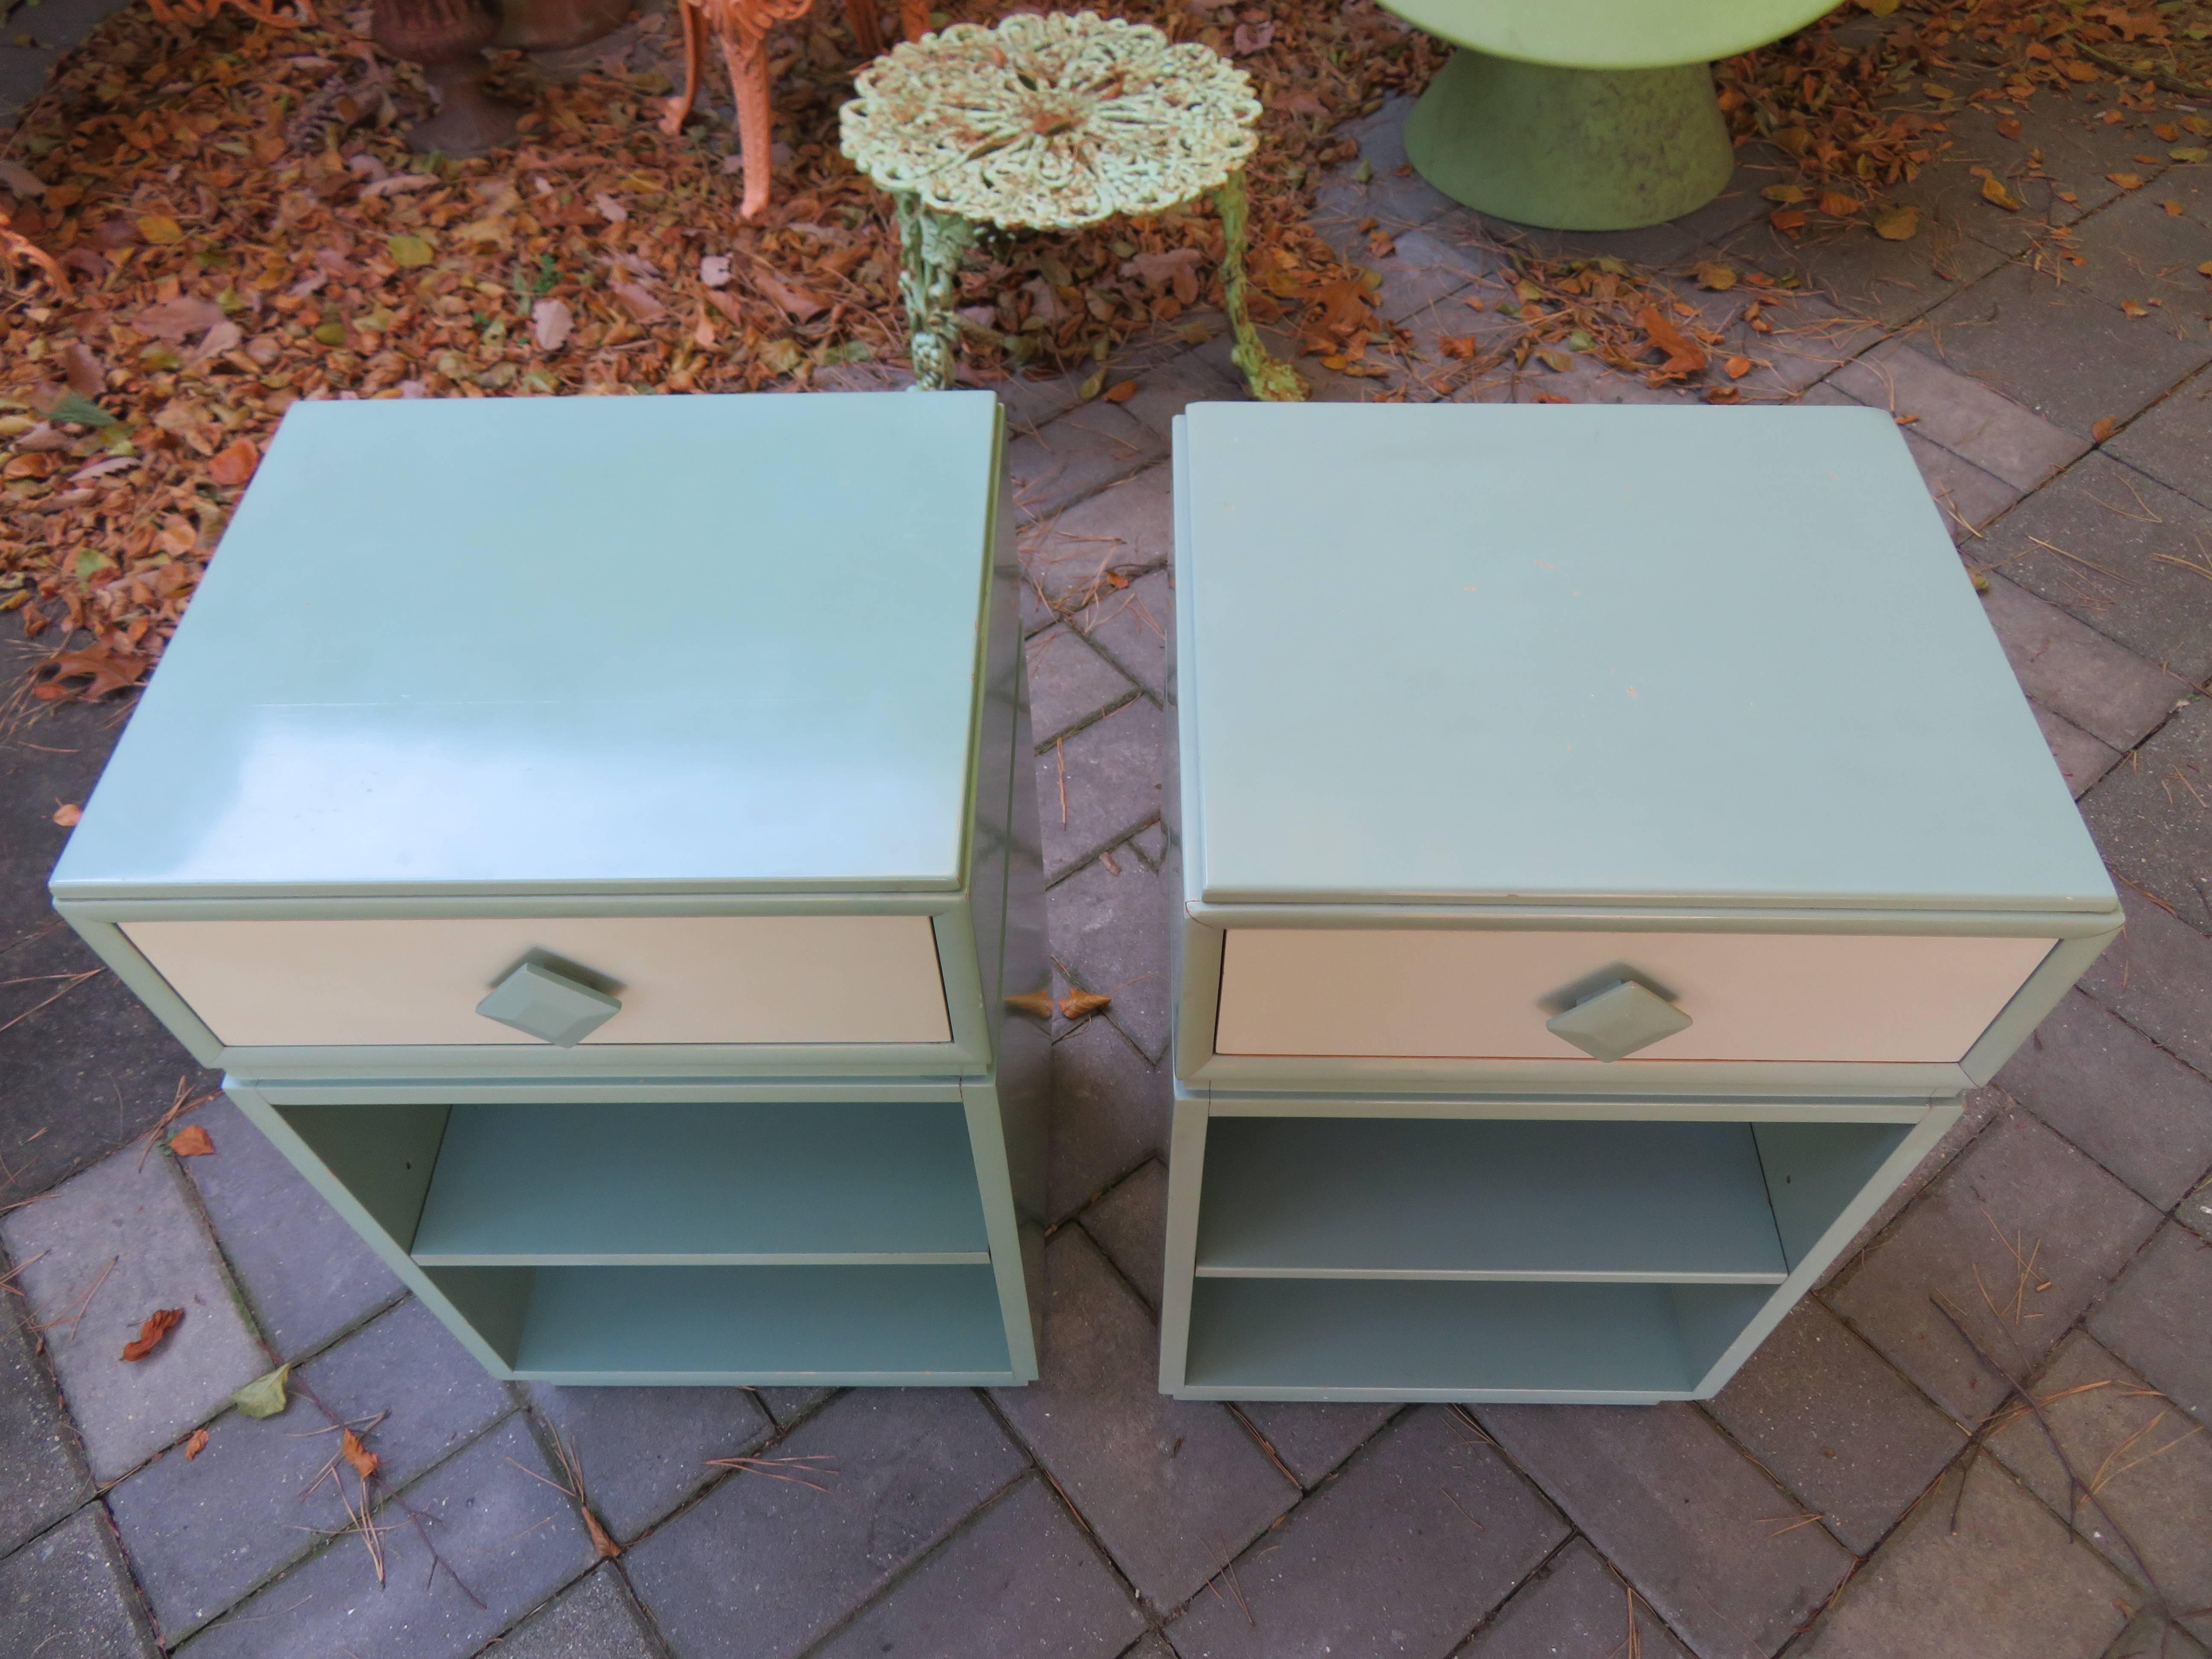 Great pair of 1940s Kittinger side table nightstands with one drawer. Shelf is adjustable. One drawers marked with branded label and the other has a paper label.